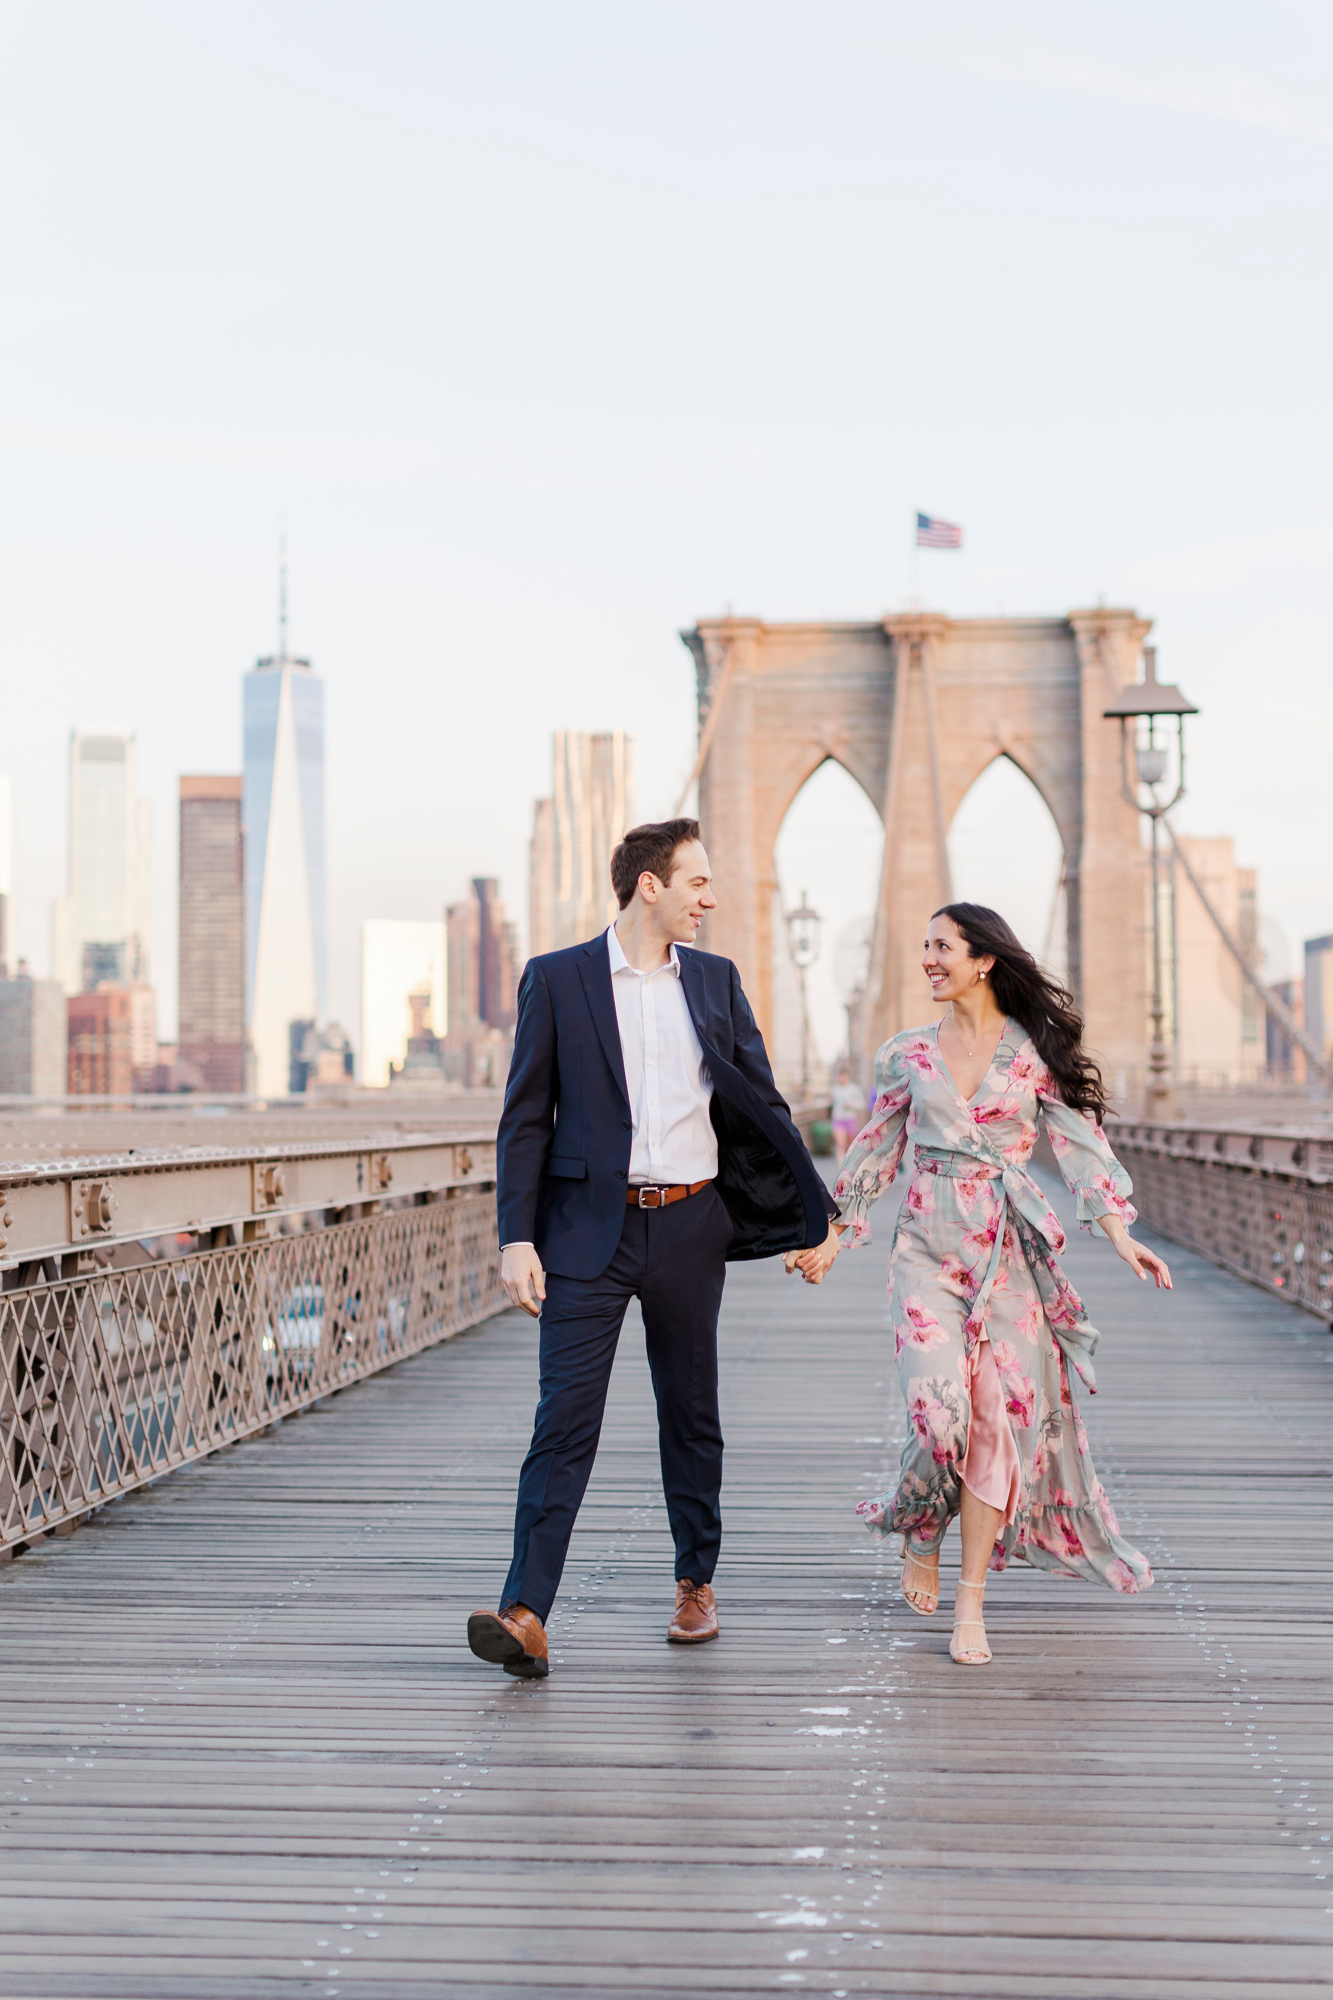 Personal Engagement Shoot in DUMBO